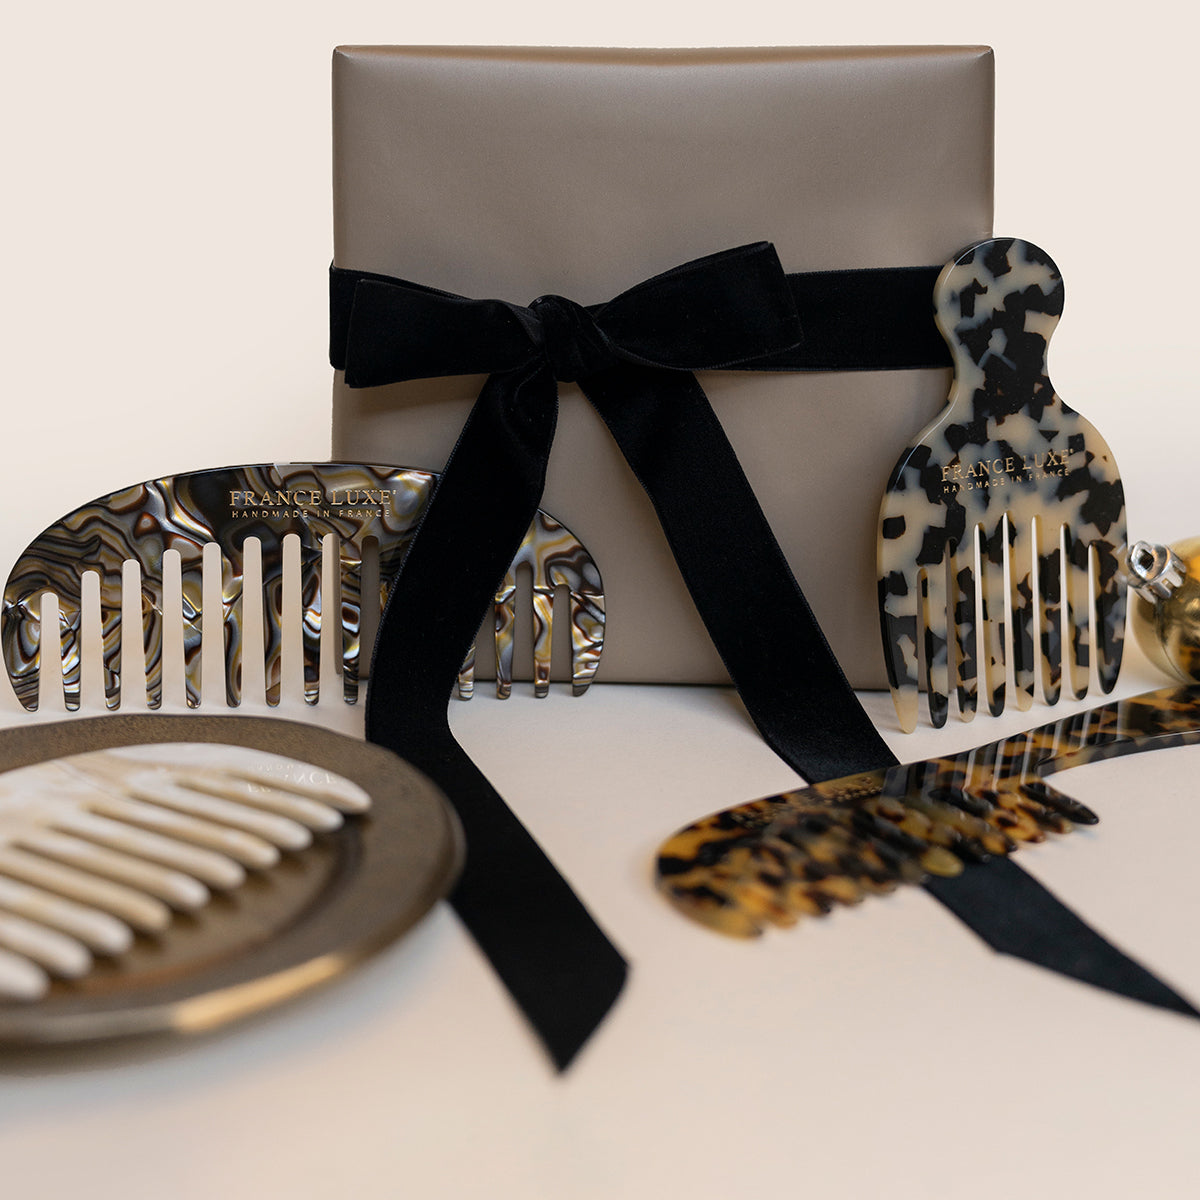 France Luxe hair combs are perfect gifts for women - on sale now 30% off!